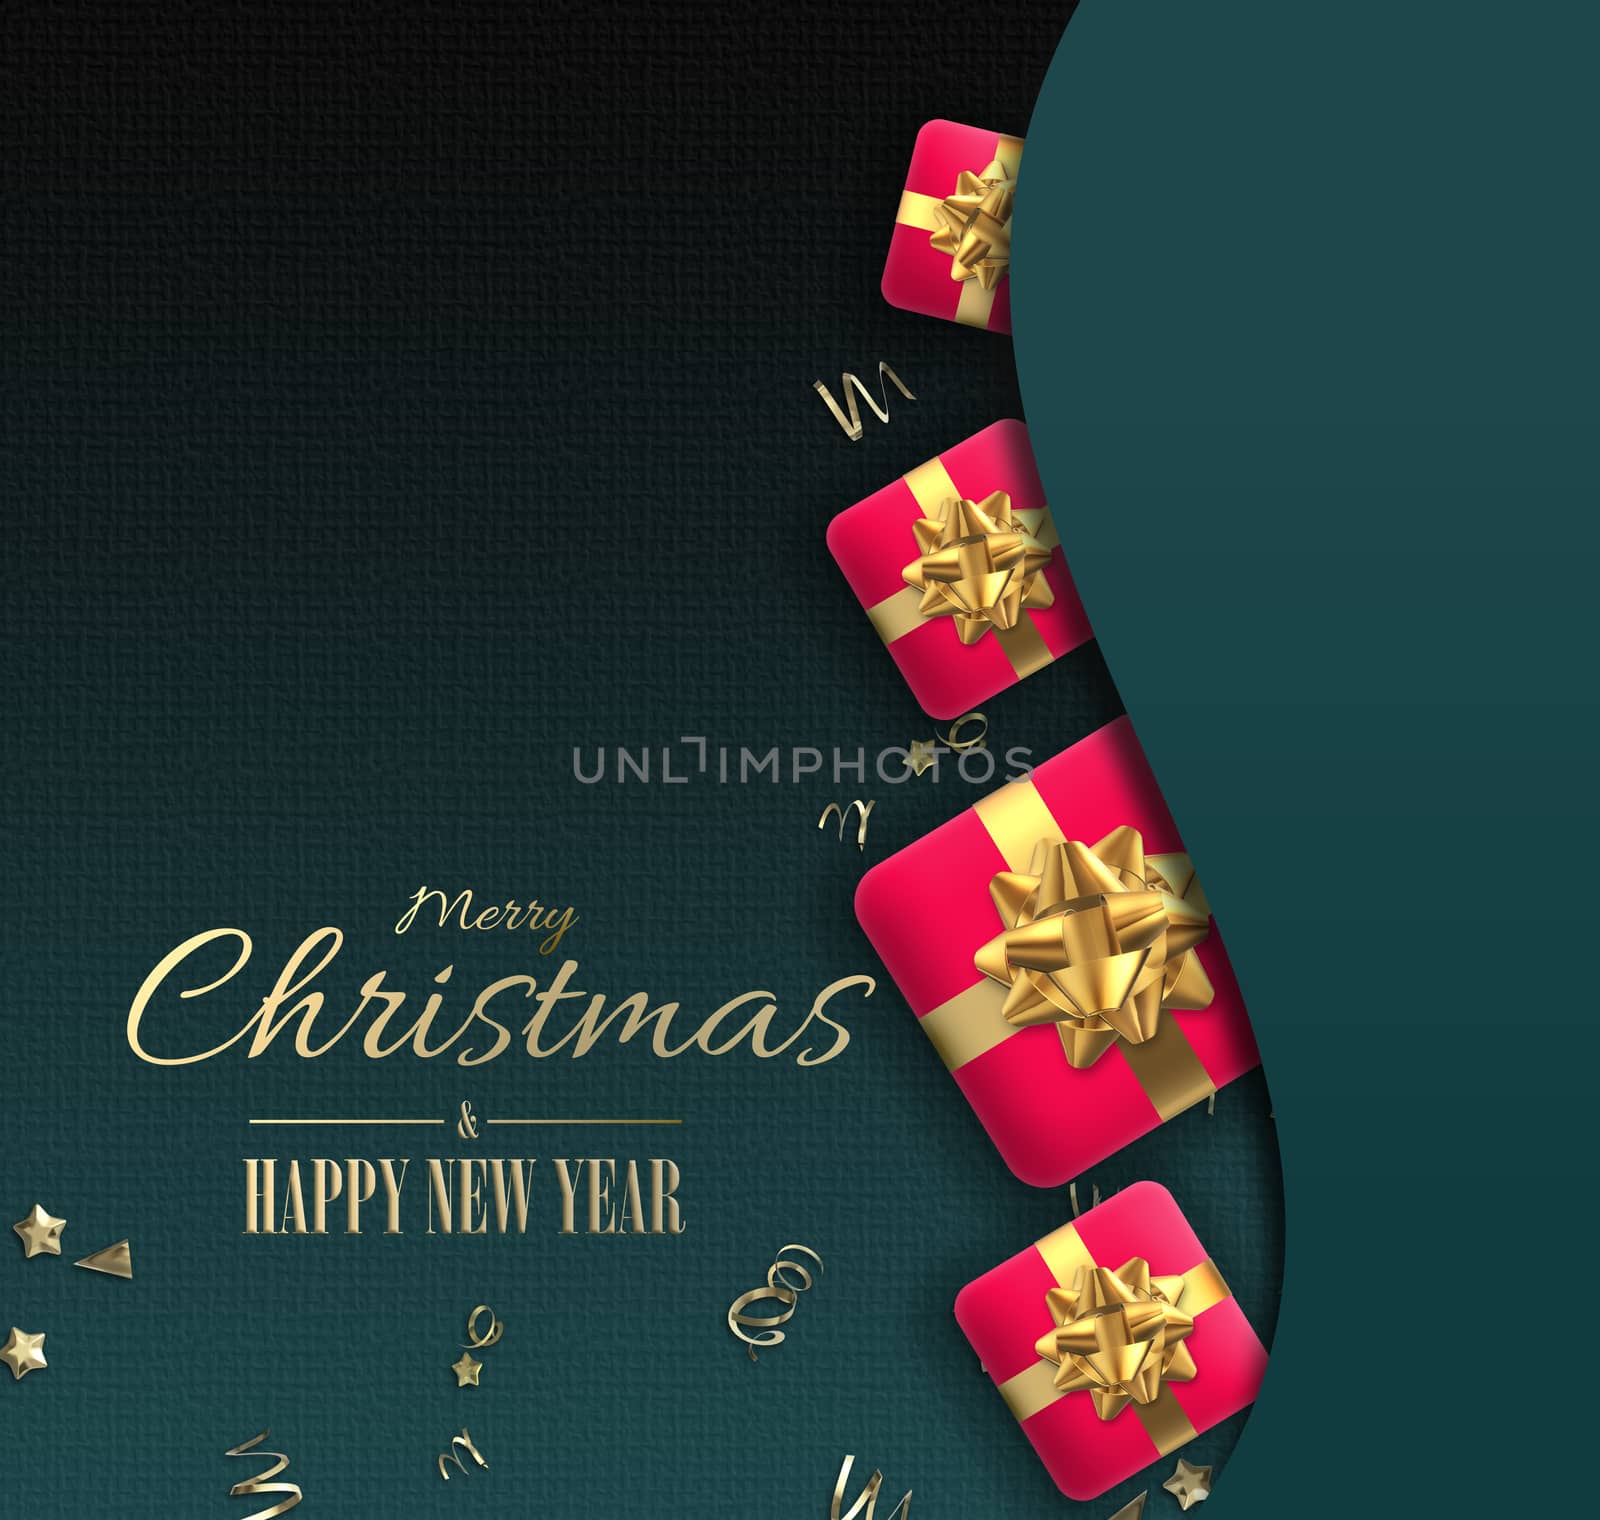 Red pink beautiful realistic Xmas gift boxes on curve red black background. Luxury holiday design for invitation, header. 3D render. Golden text Merry Christmas Happy New Year